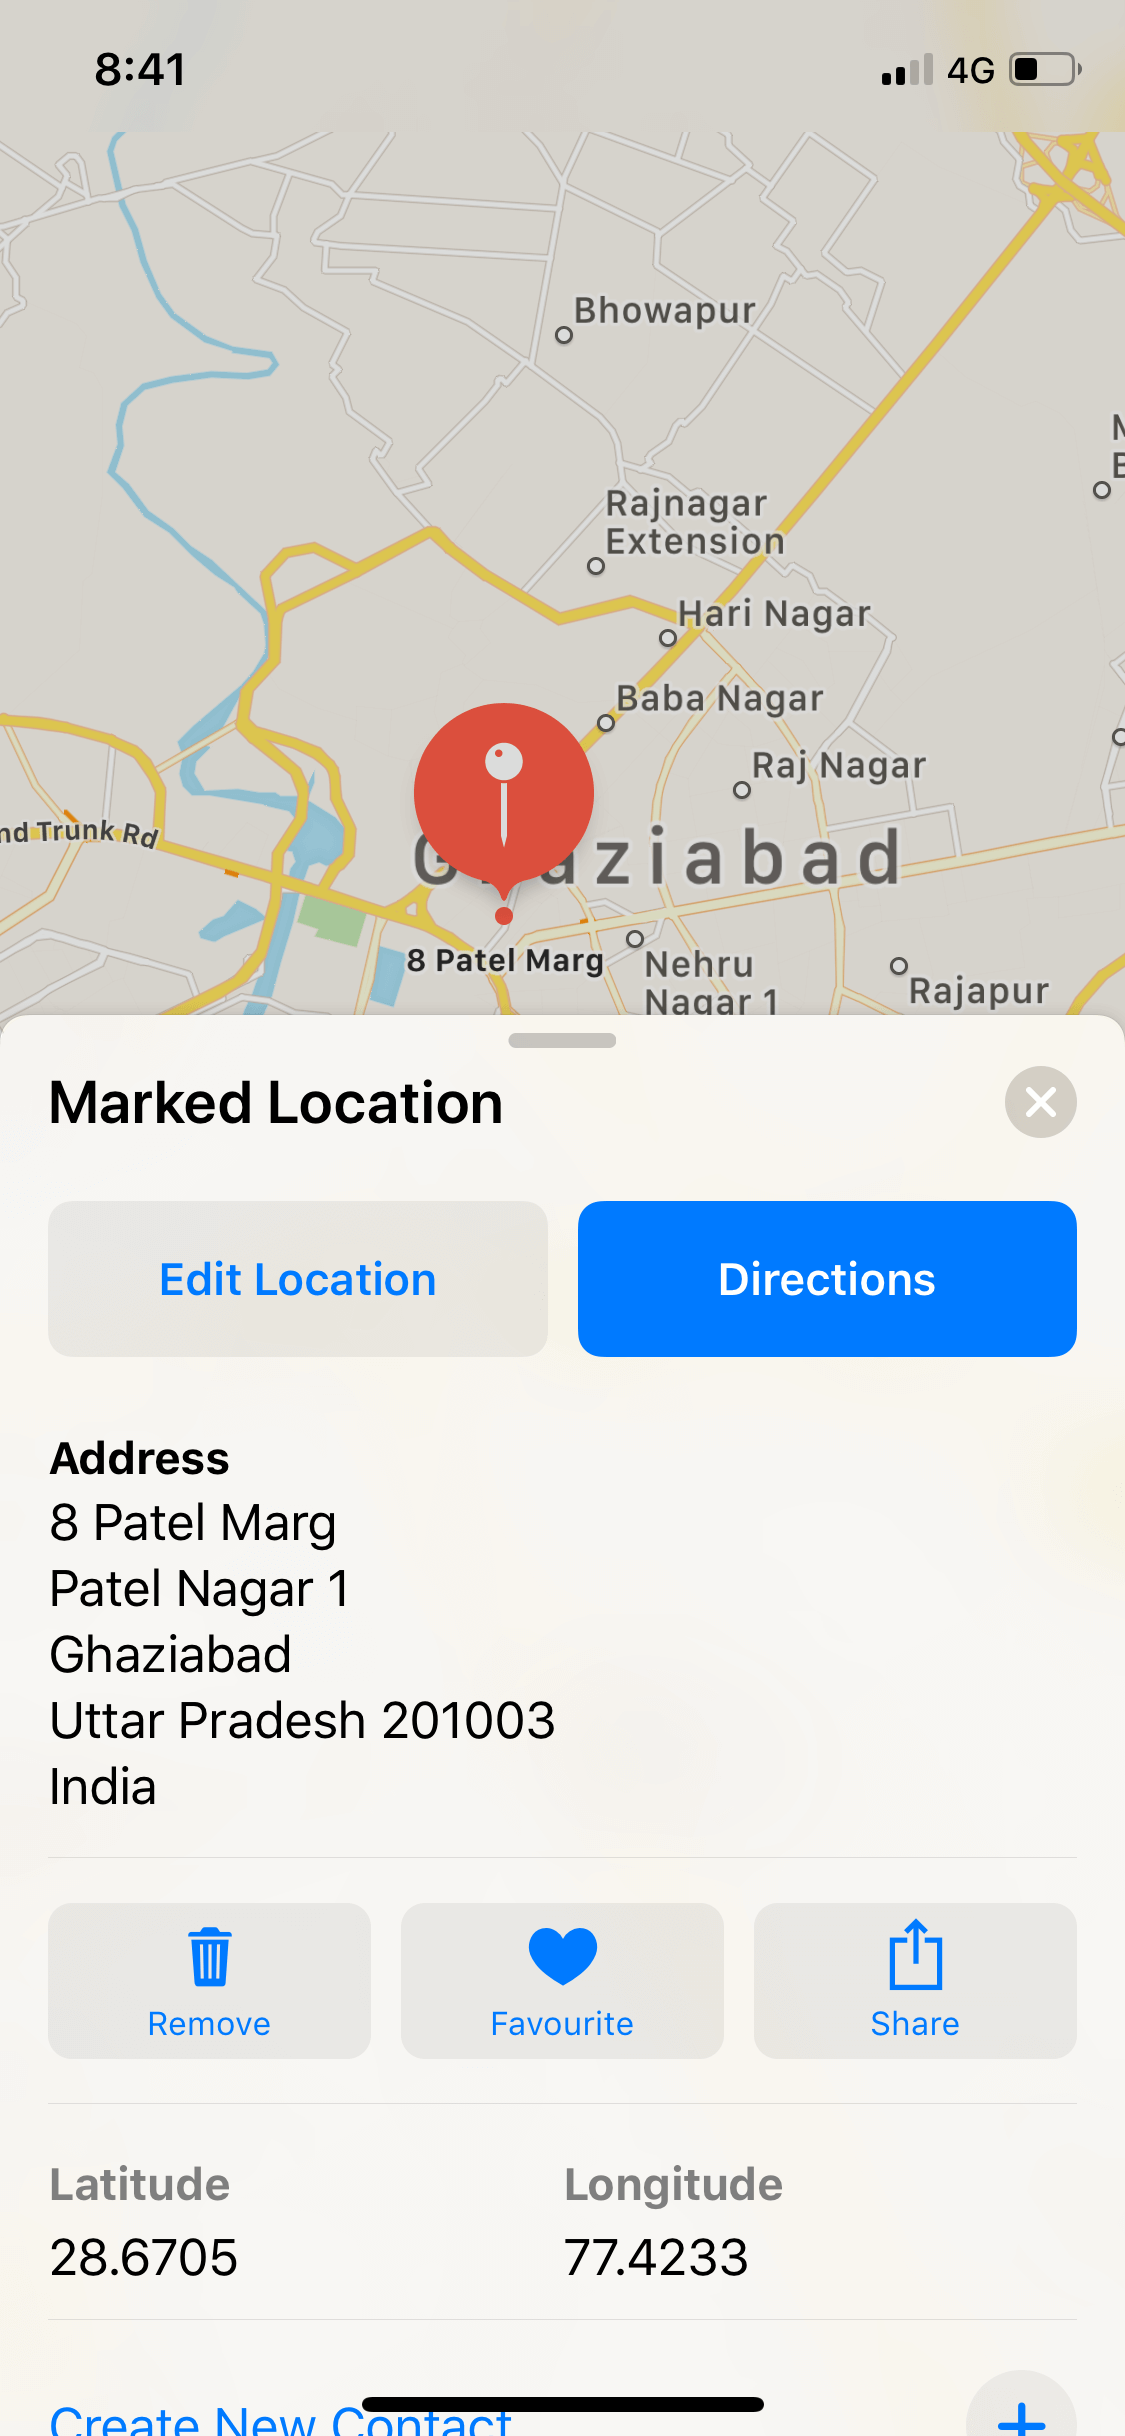 Find GPS coordinates of any location using the in-built Maps on iPhone